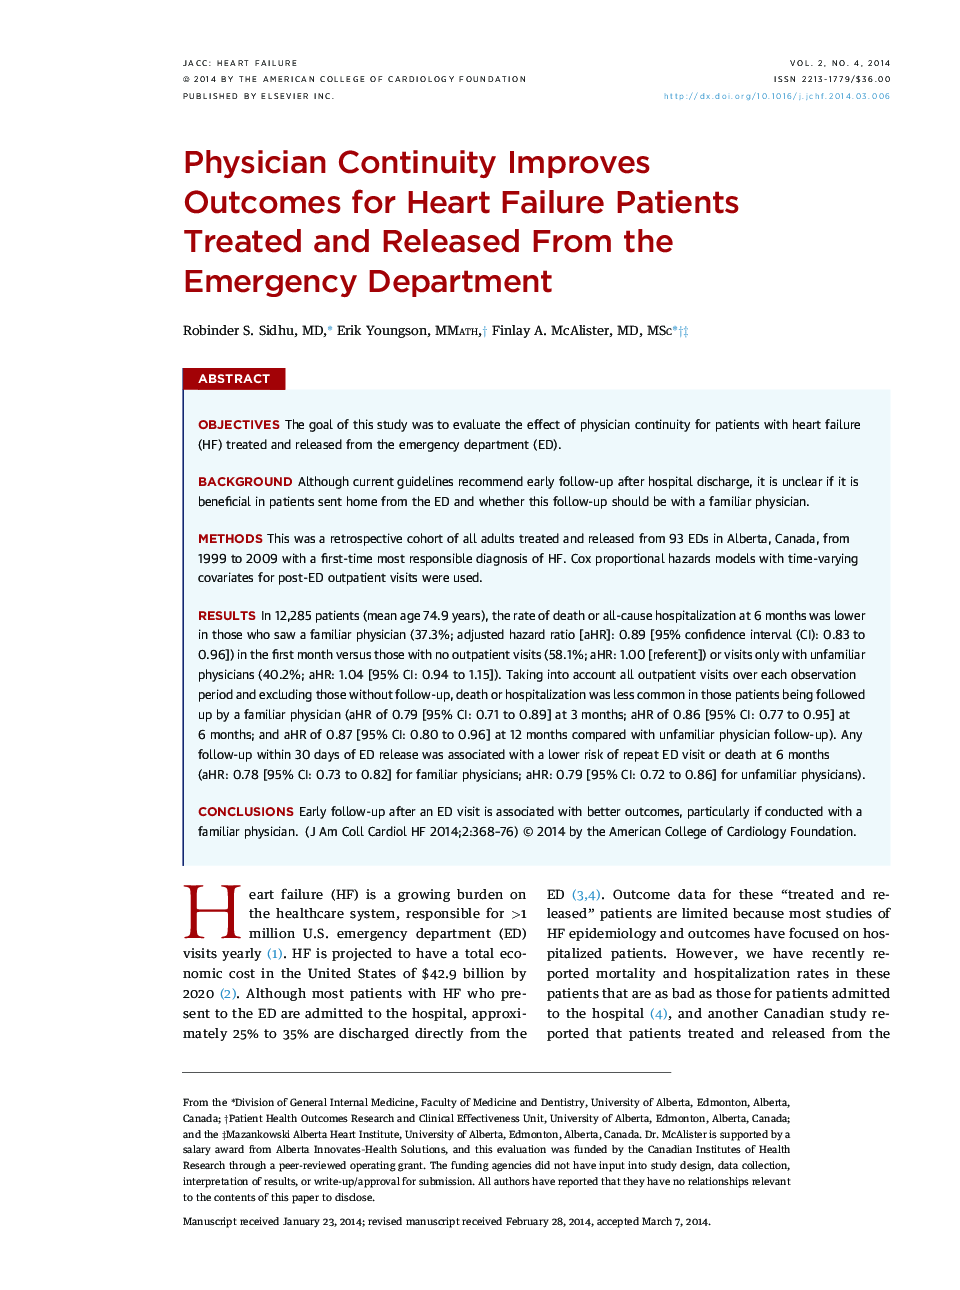 Physician Continuity Improves Outcomes for Heart Failure Patients Treated and Released From the Emergency Department 